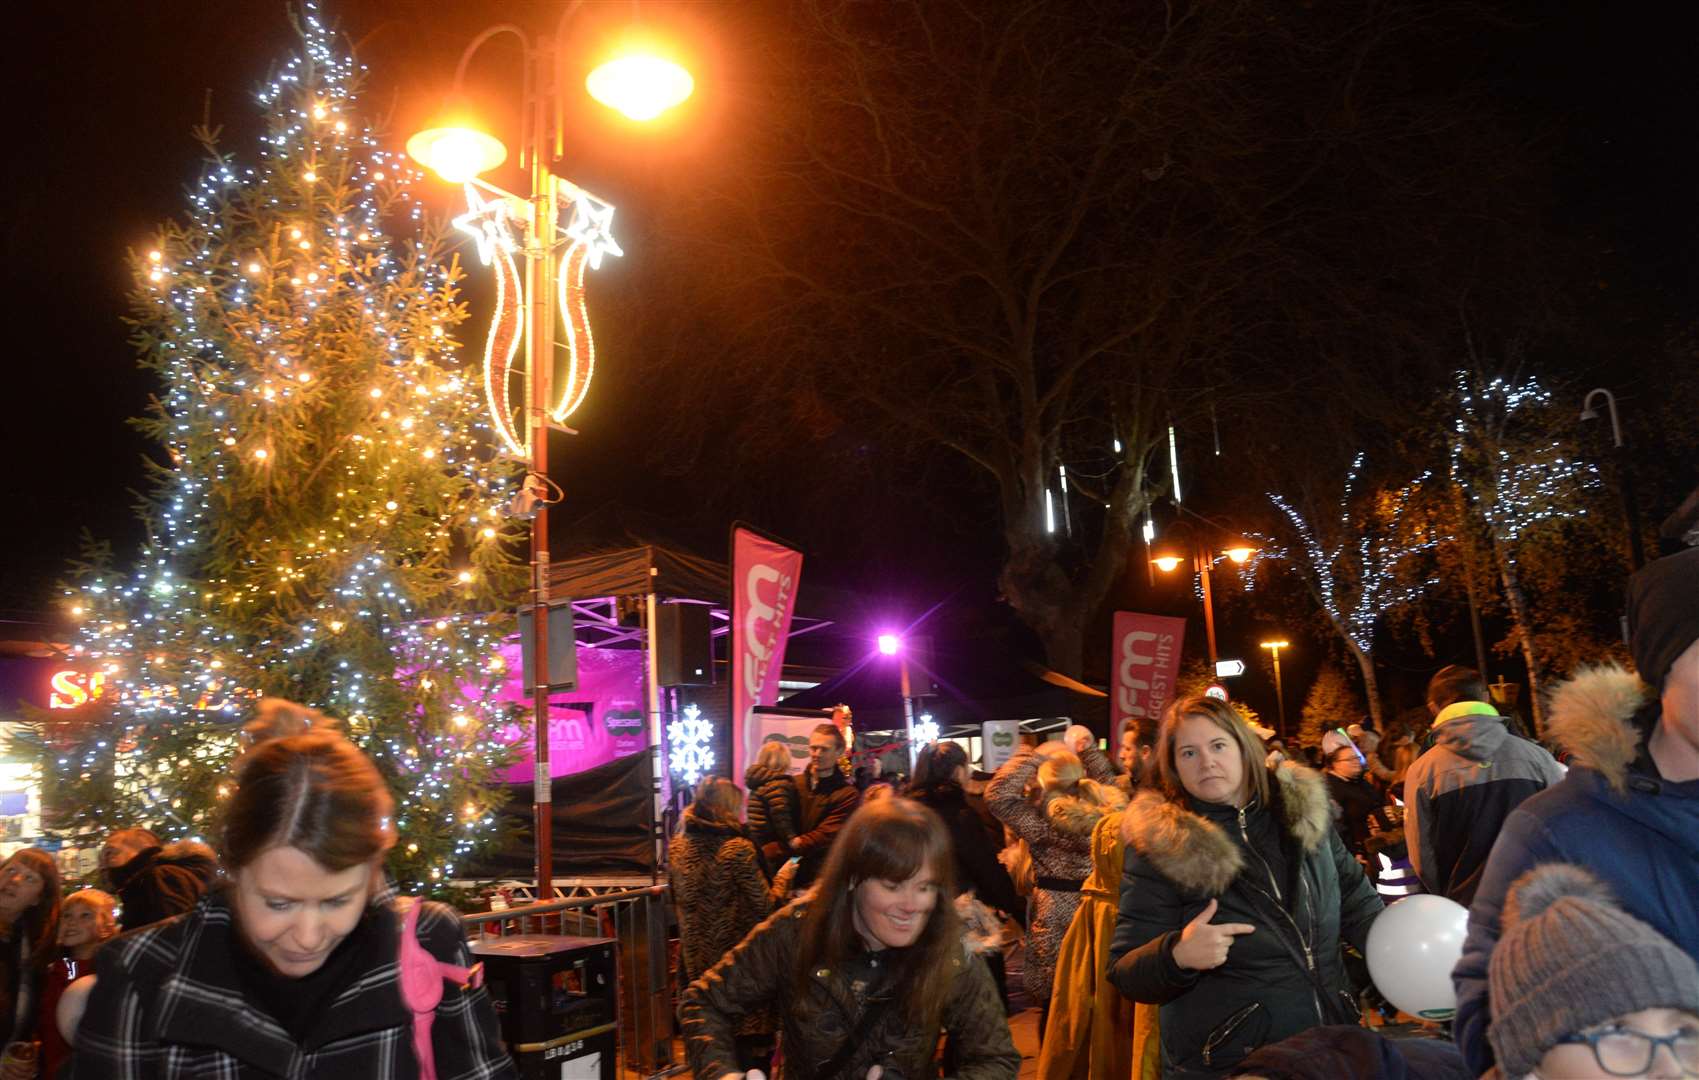 The Christmas lights switch-on in Rainham last year. Picture: Chris Davey.